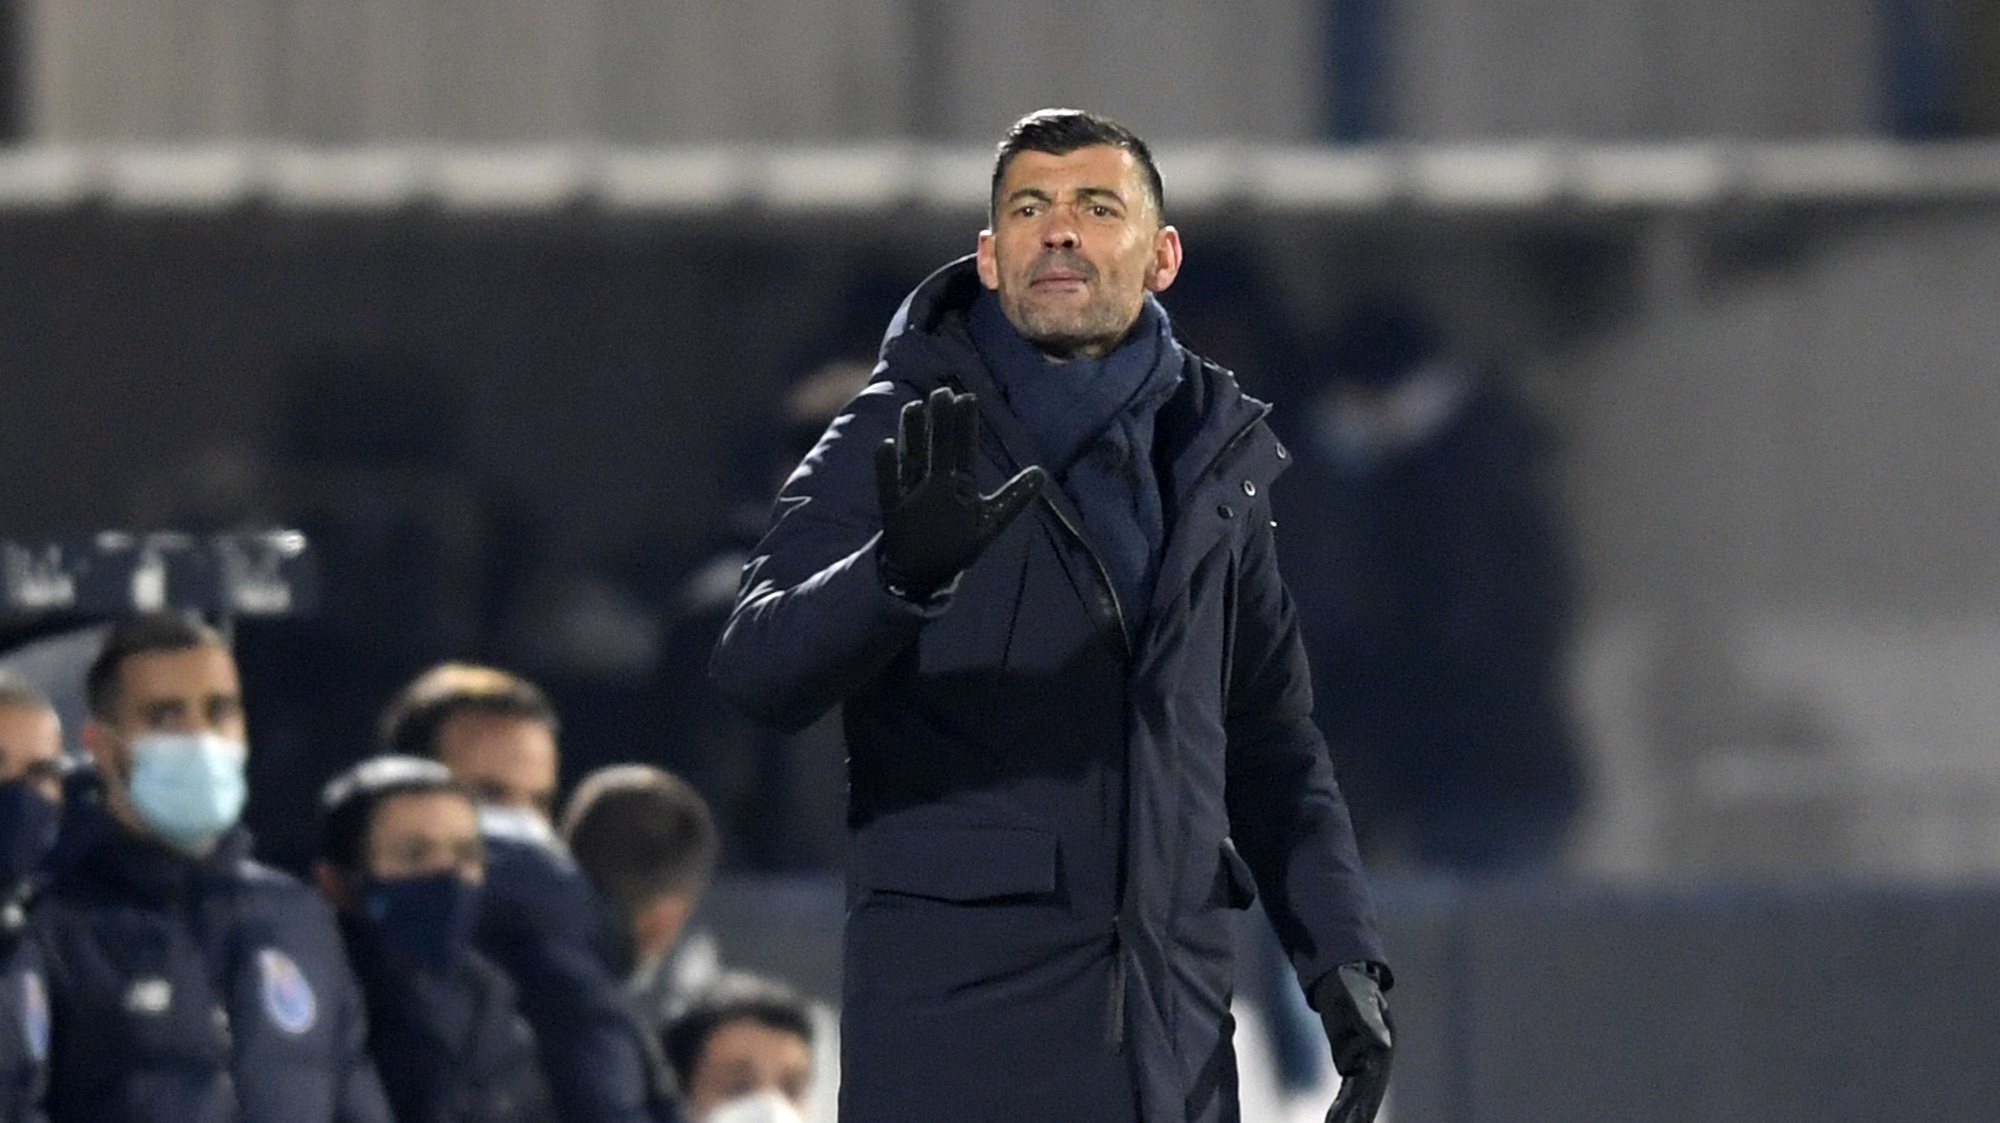 FC Porto head coach Sergio Conceicao gives instructions to his players during their Portuguese First League soccer match against Famalicao held at Municipal Stadium, in Famalicao, north of Portugal, 08 January 2021. FERNANDO VELUDO/LUSA